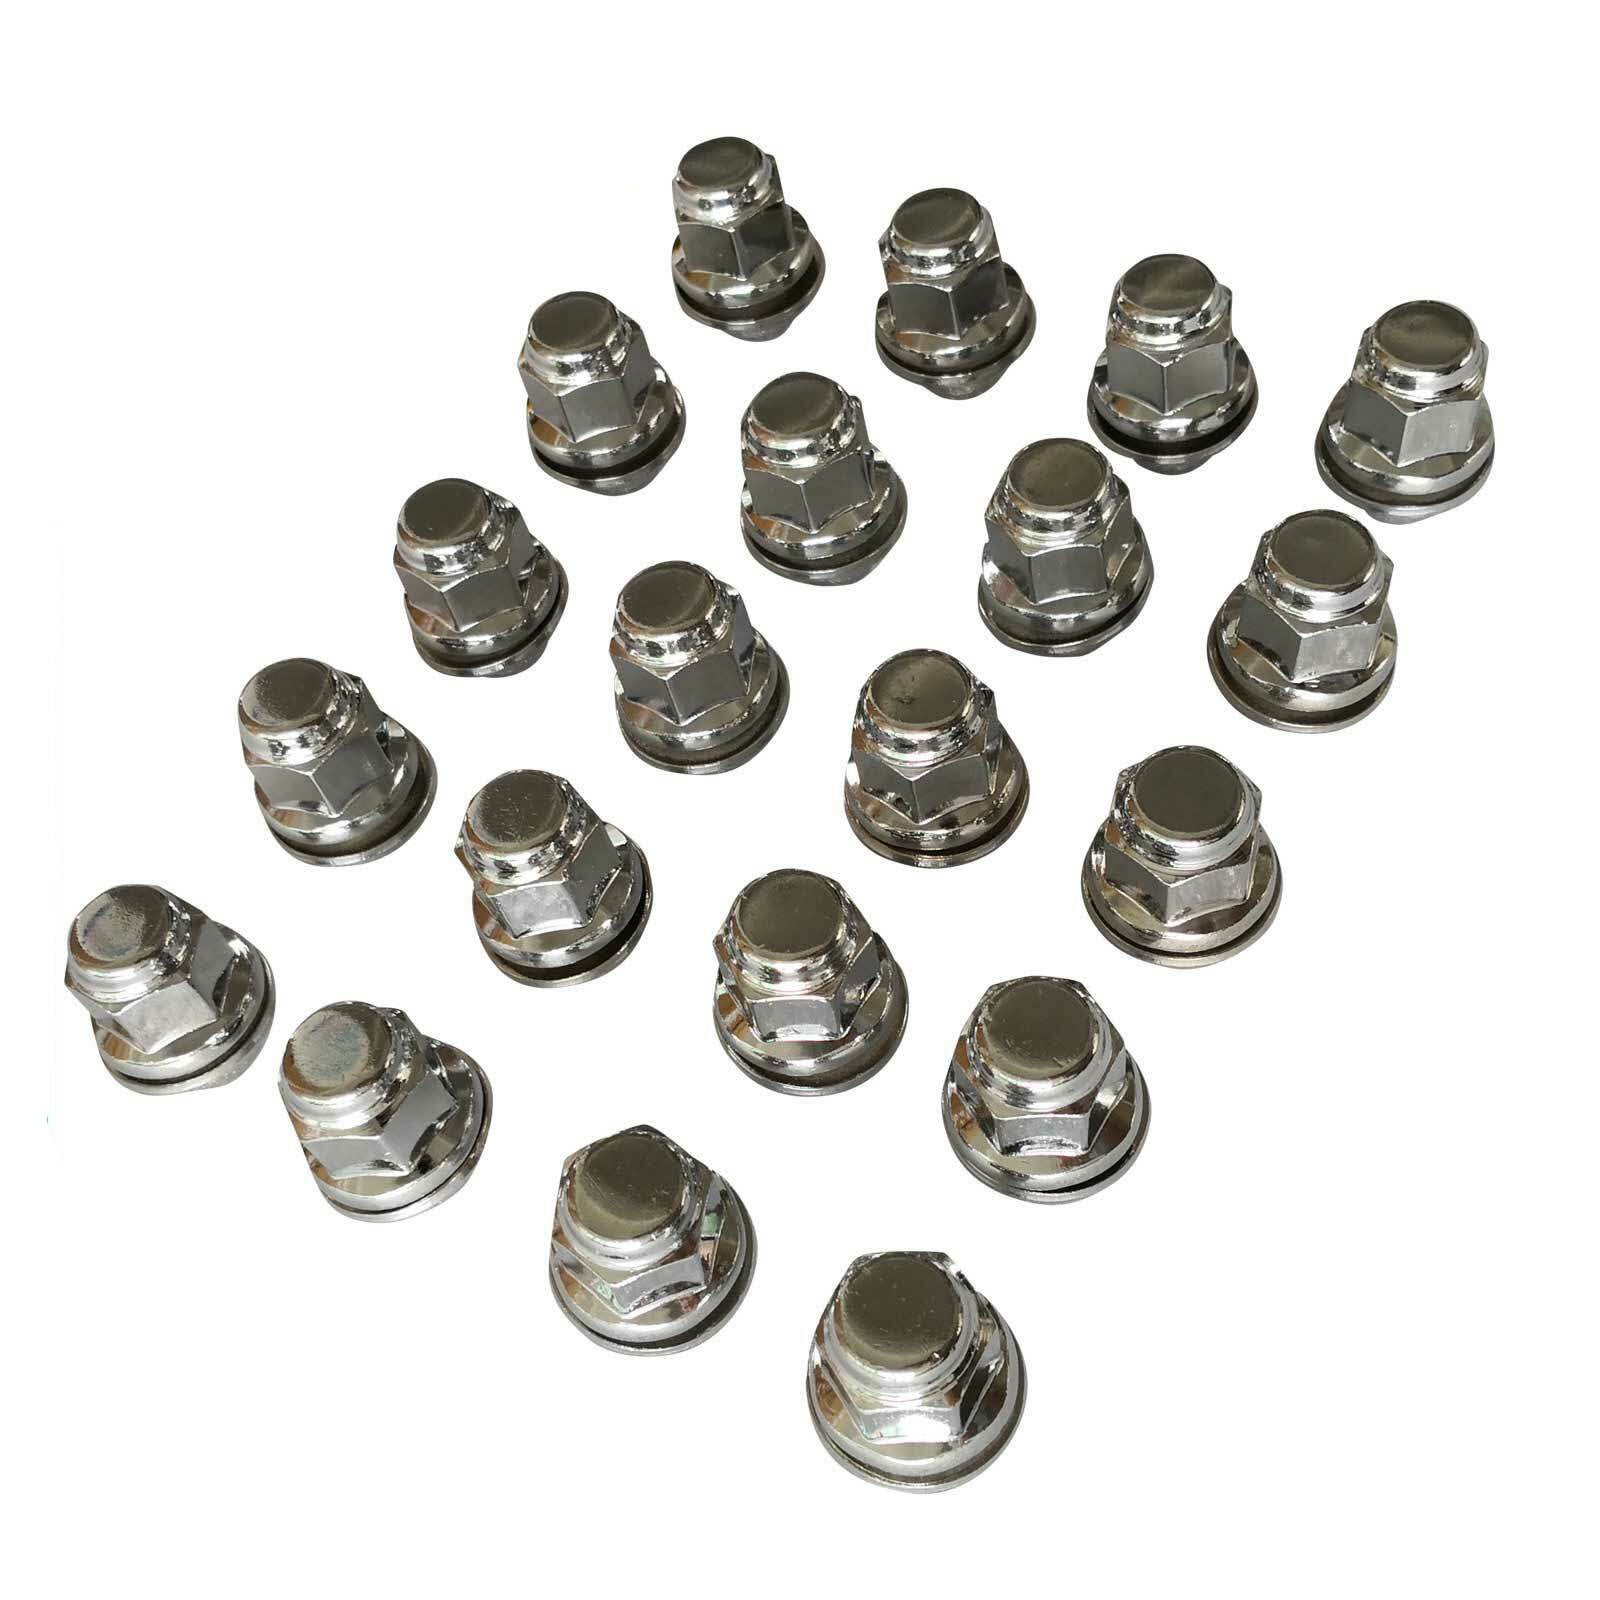 24pc Chrome Wheel Nuts Fit For Toyota Hilux KUN26R 12mmx1.5 Alloy Wheels With Washer 